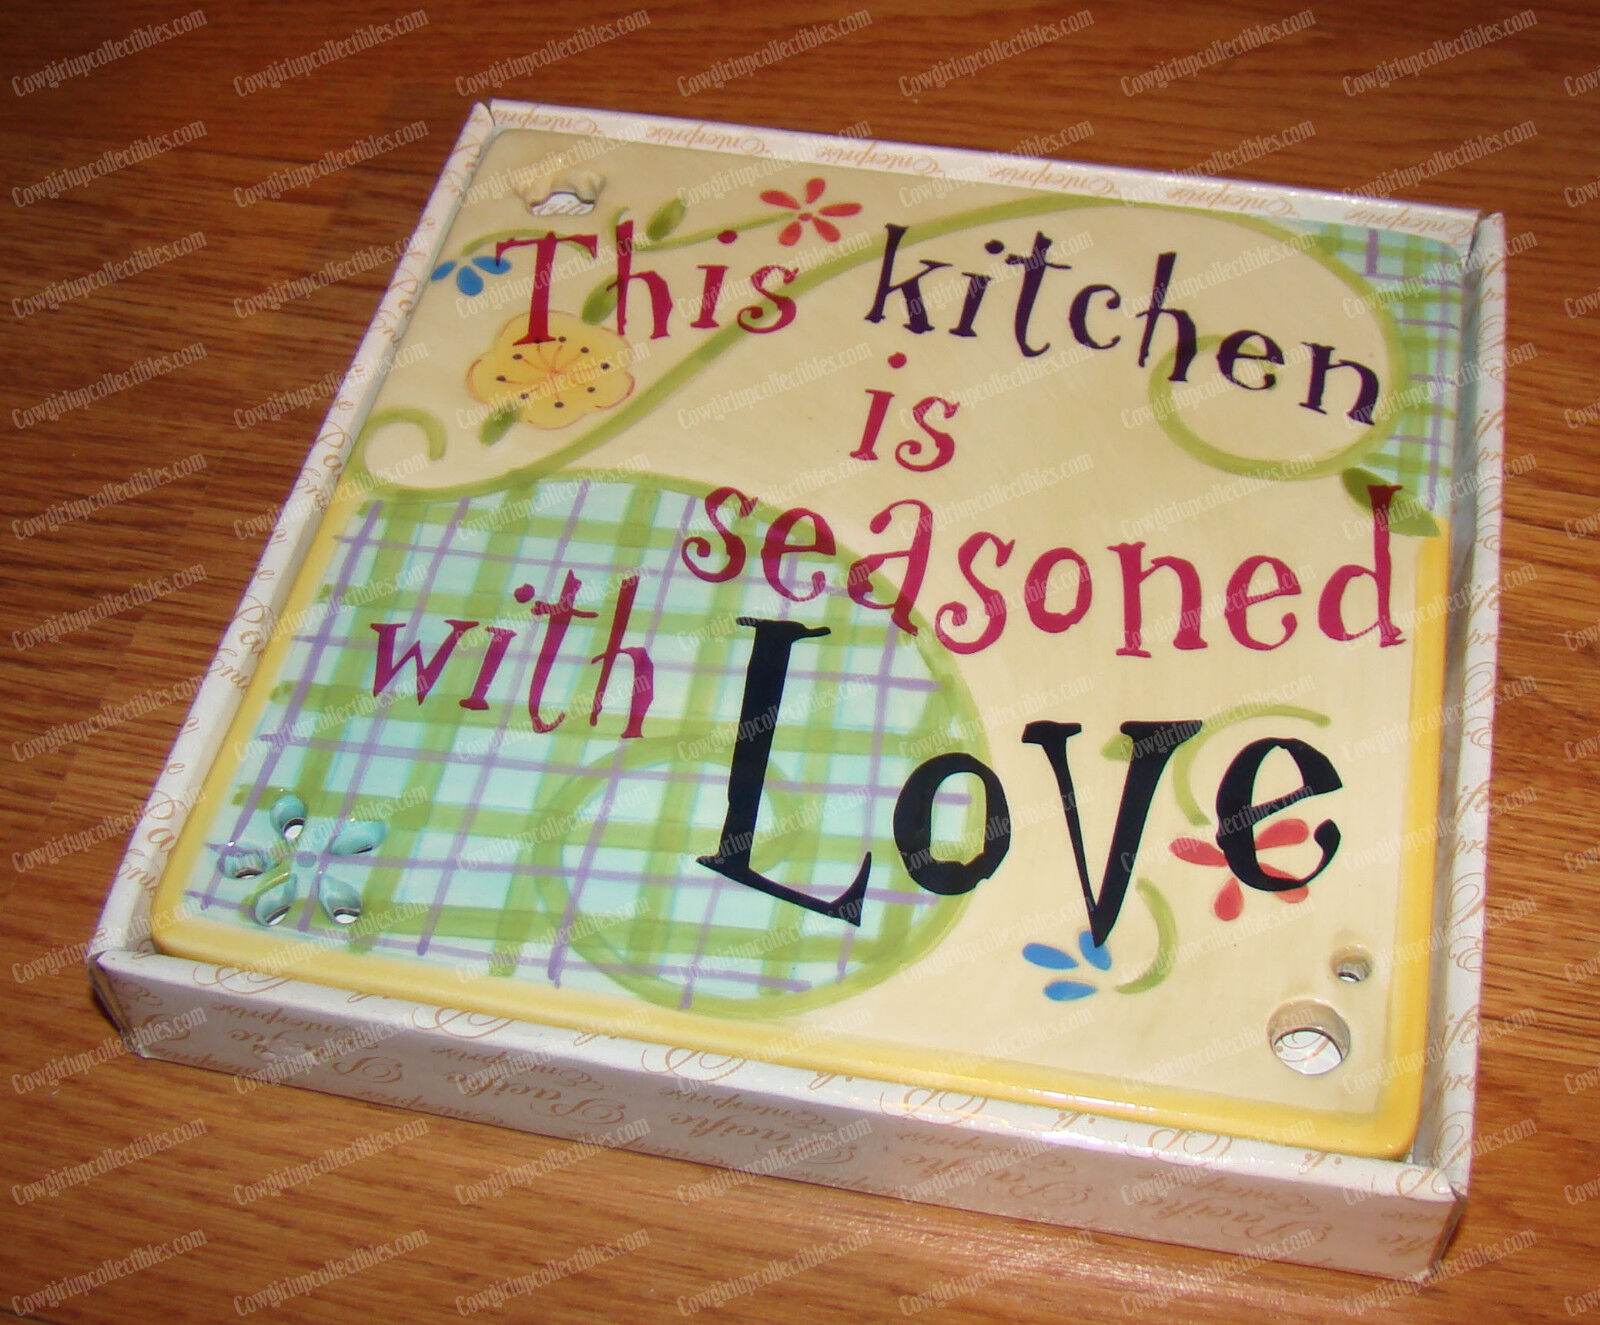 Home Inspirations, This KITCHEN SEASONED with LOVE Trivet (53108) Ceramic